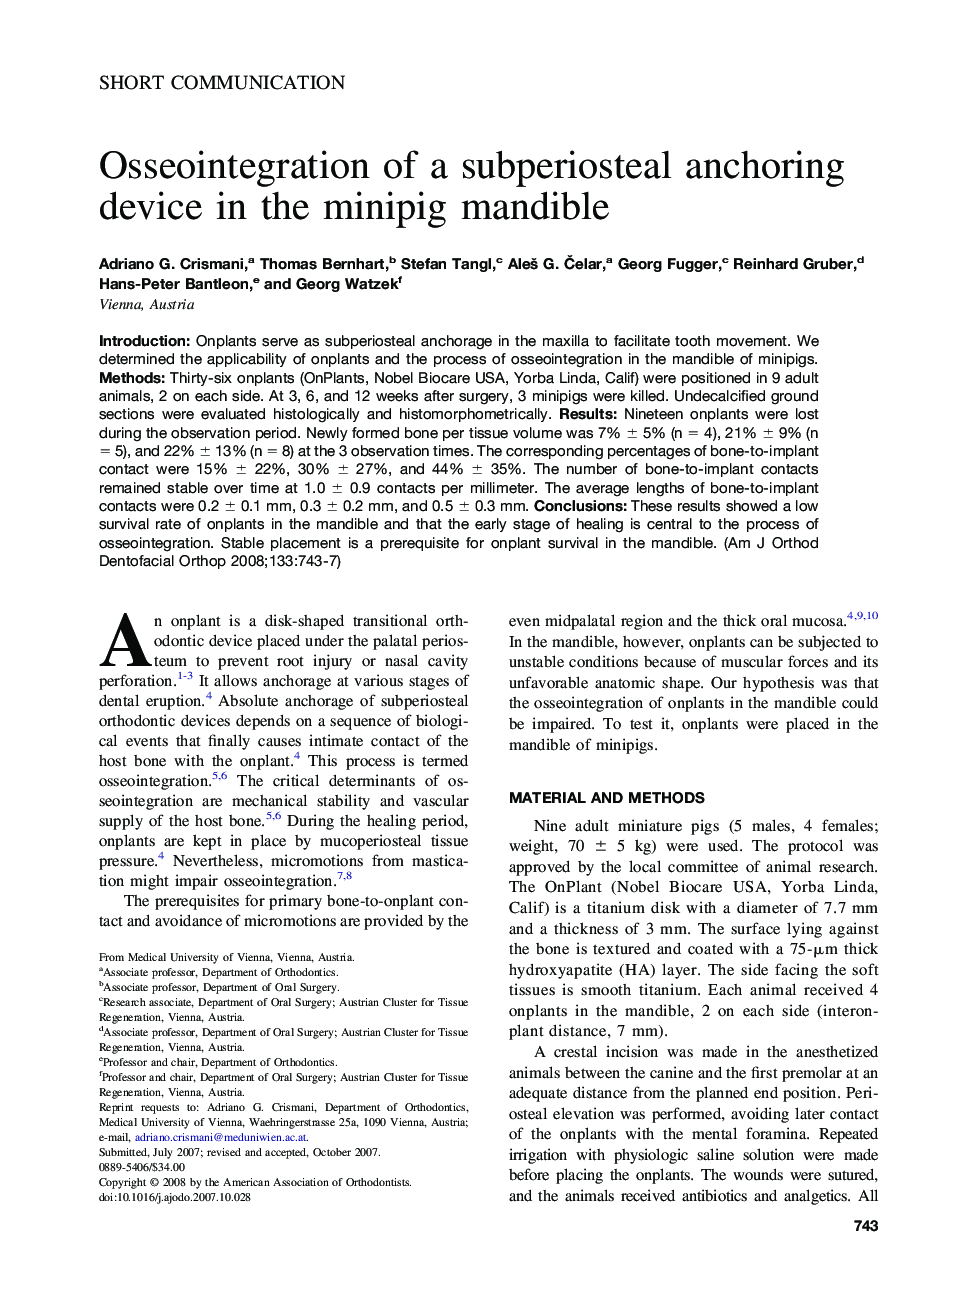 Osseointegration of a subperiosteal anchoring device in the minipig mandible